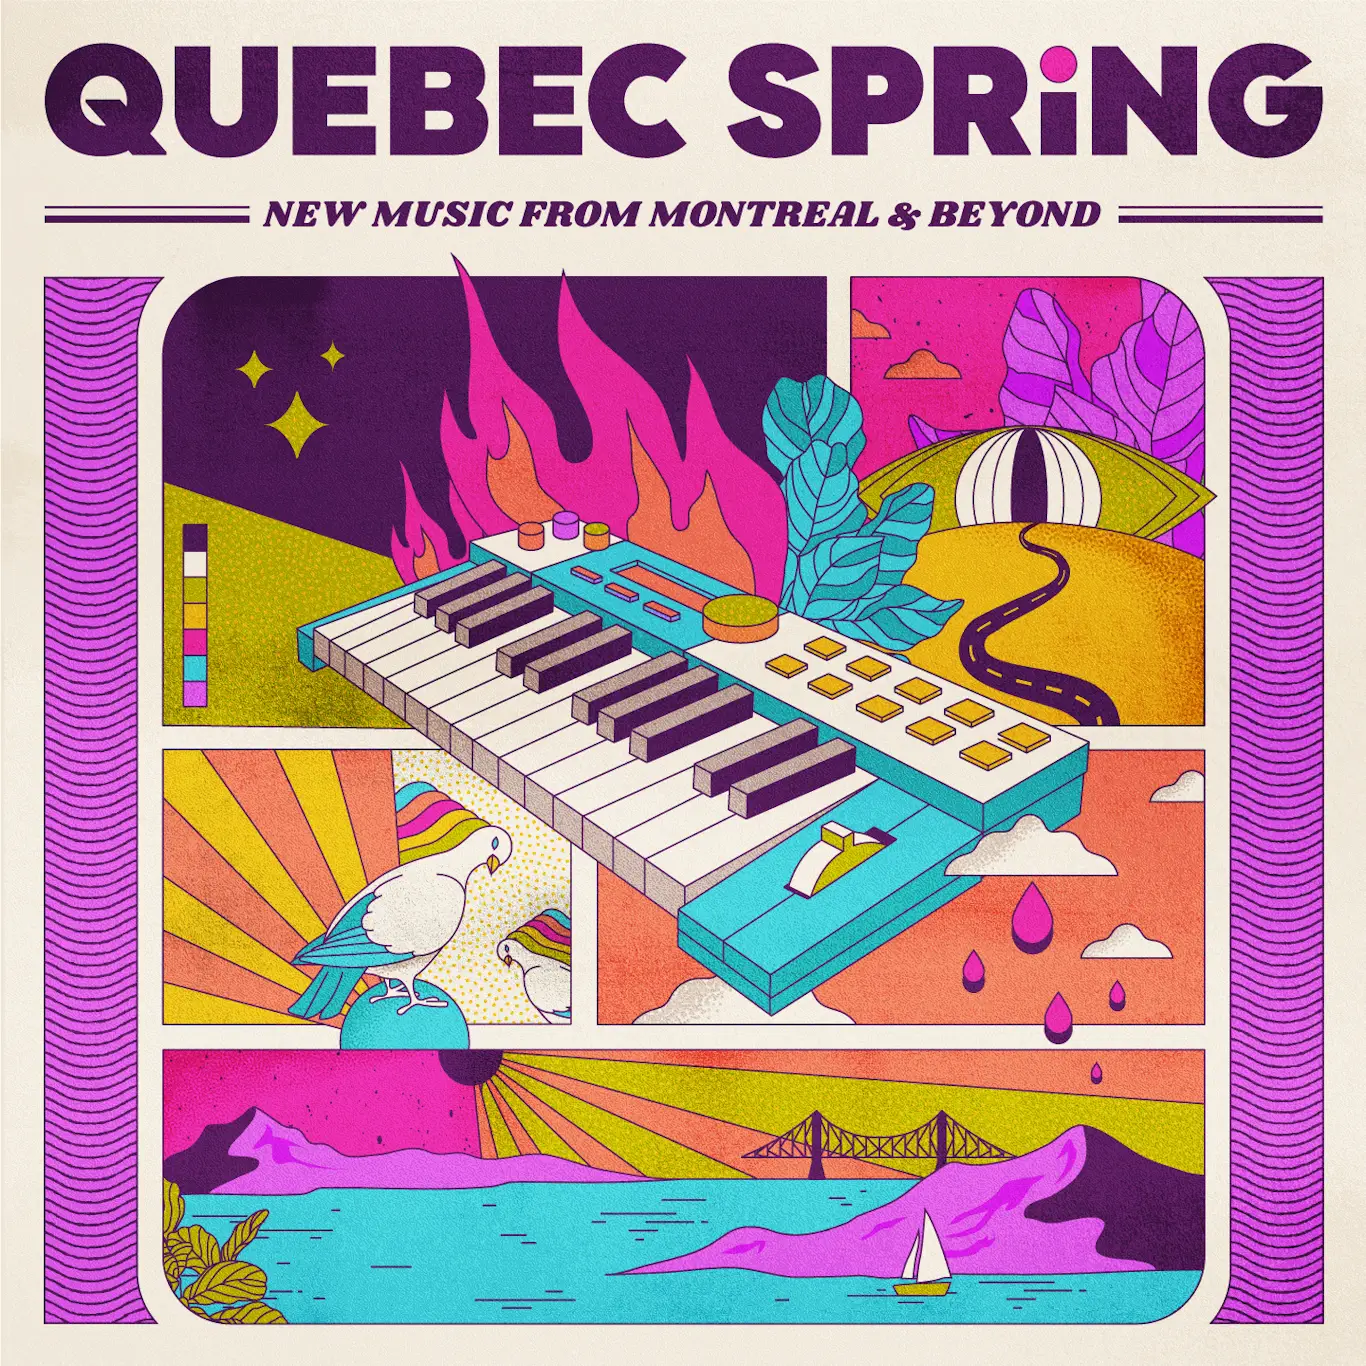 Introducing QUEBEC SPRING, New Music From Montreal & Beyond